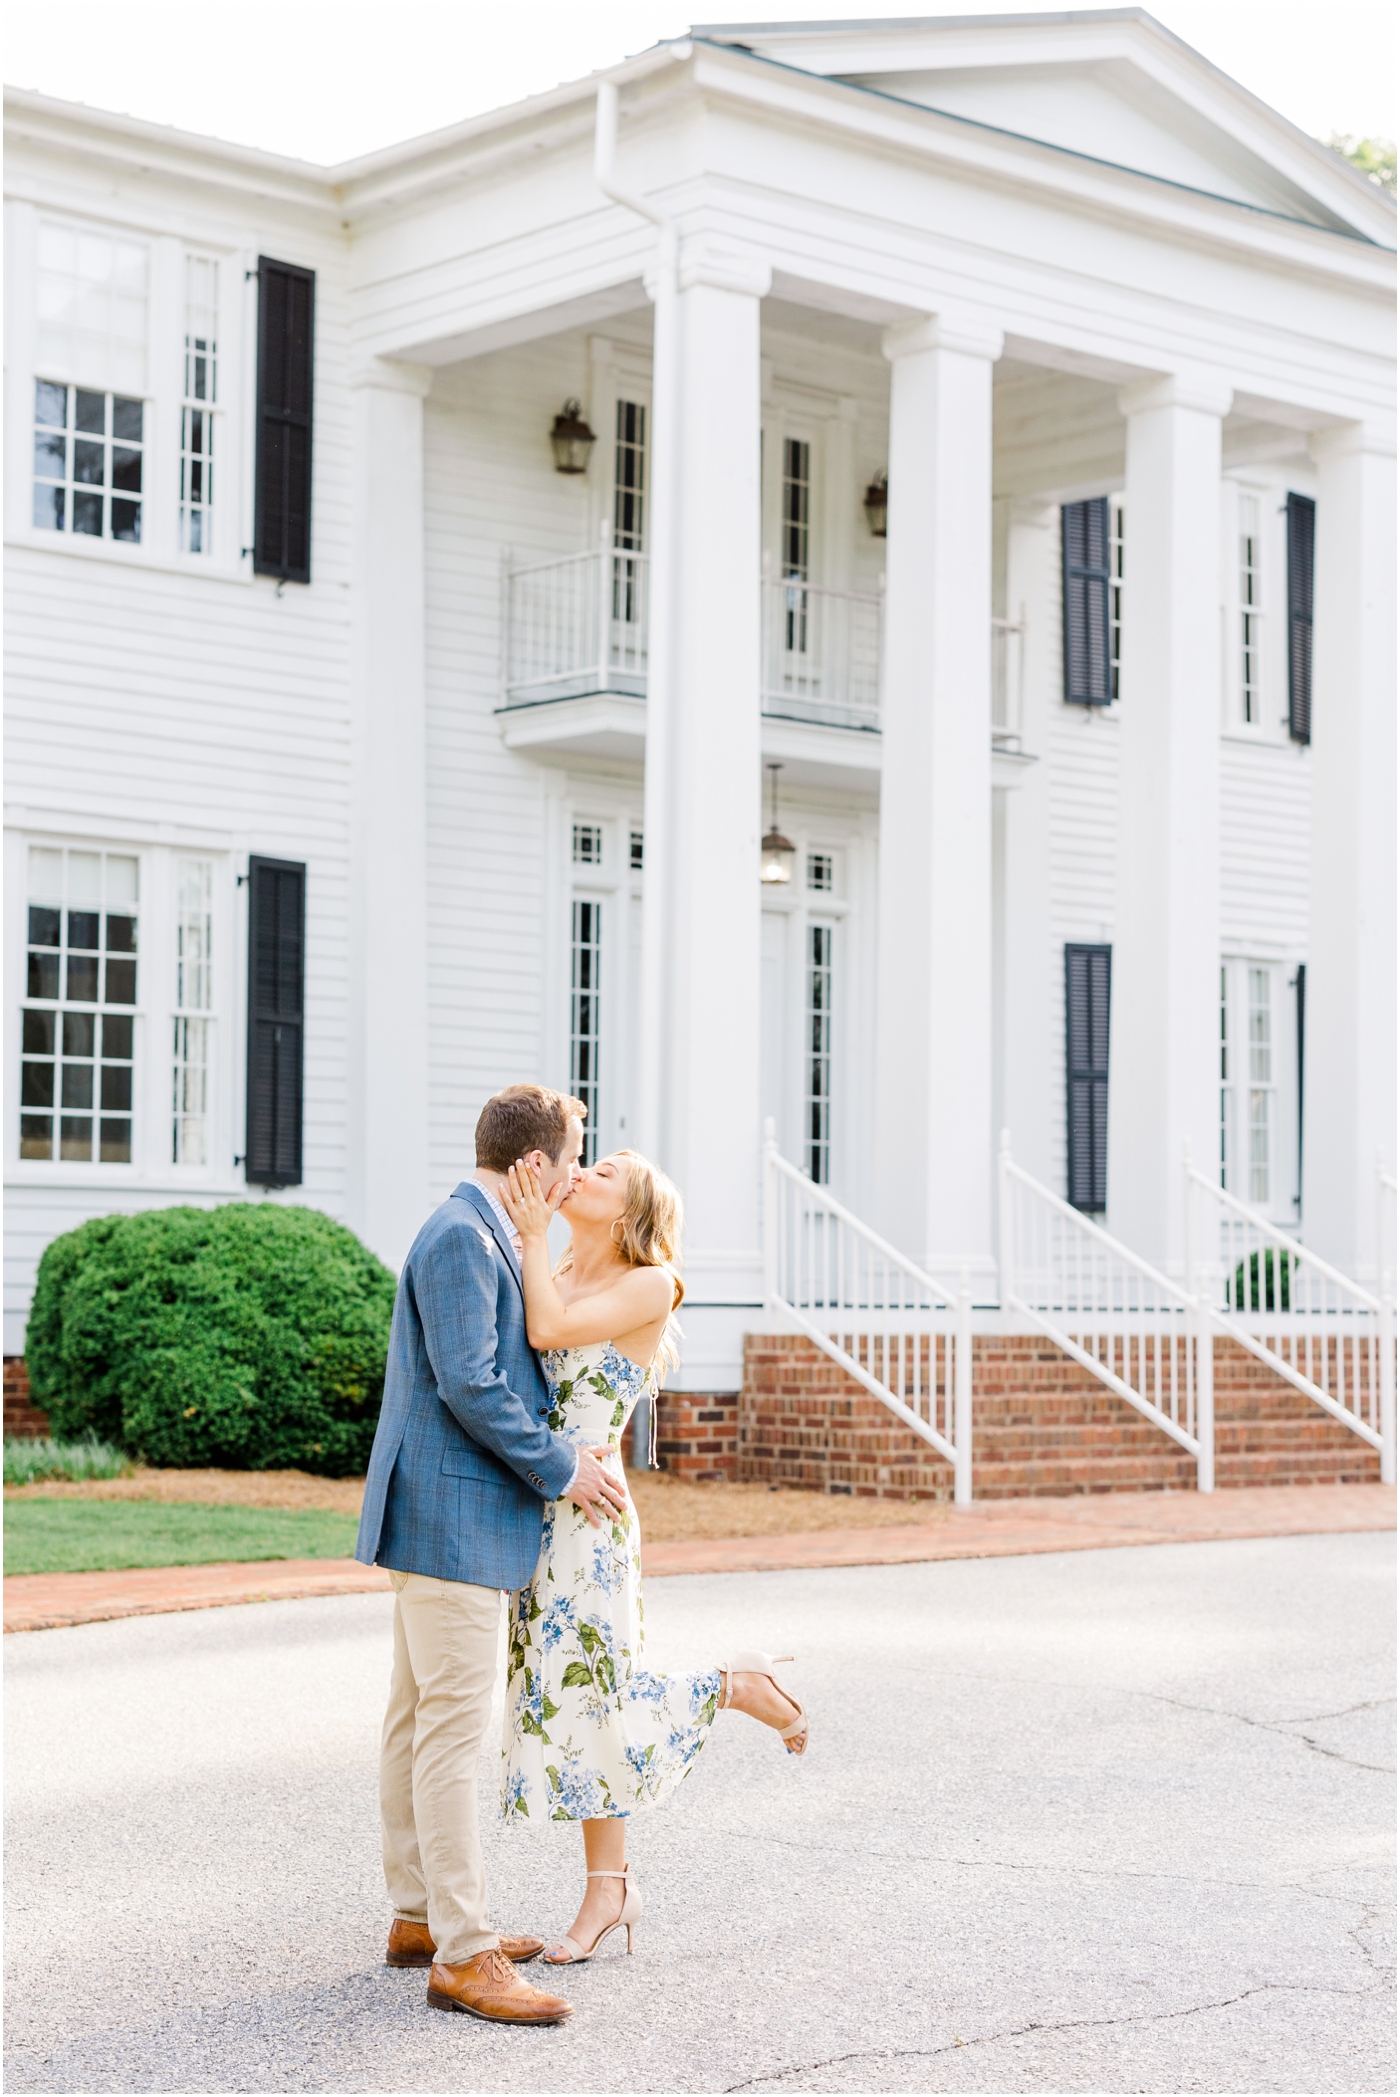 Furman University Engagement Session in Greenville SC at the President's House